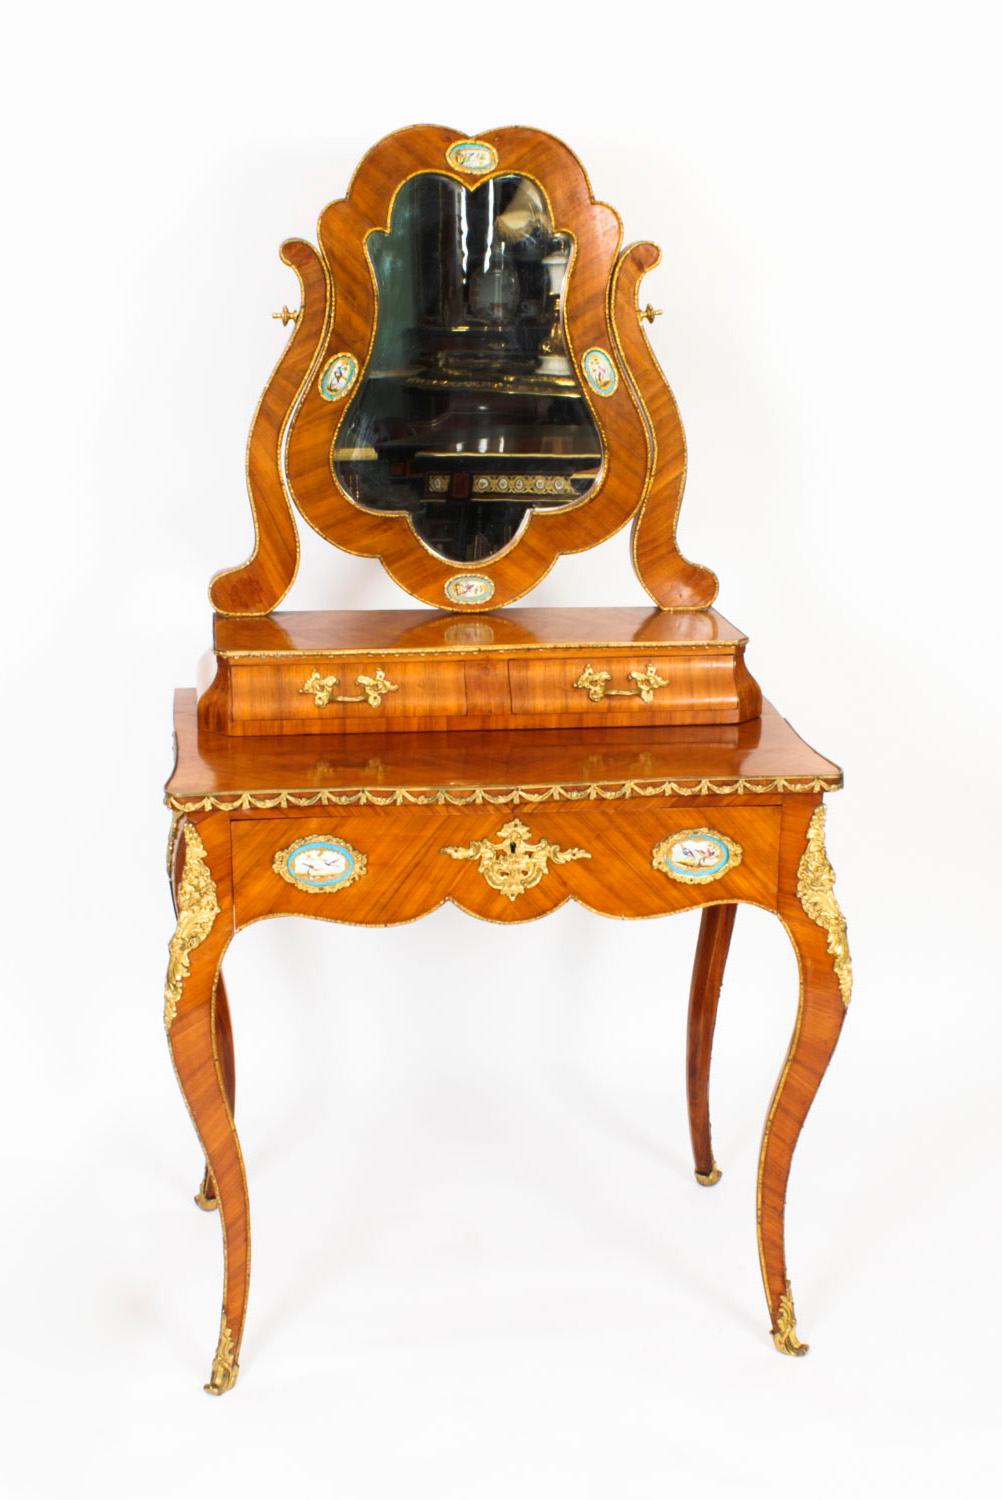 This is a beautiful antique French bois de Violette, ormolu and Sevres porcelain mounted dressing table circa 1860 in date.
 
It has been masterfully crafted from beautiful Bois de Violette highlighted with decorative ormolu banding and ormolu